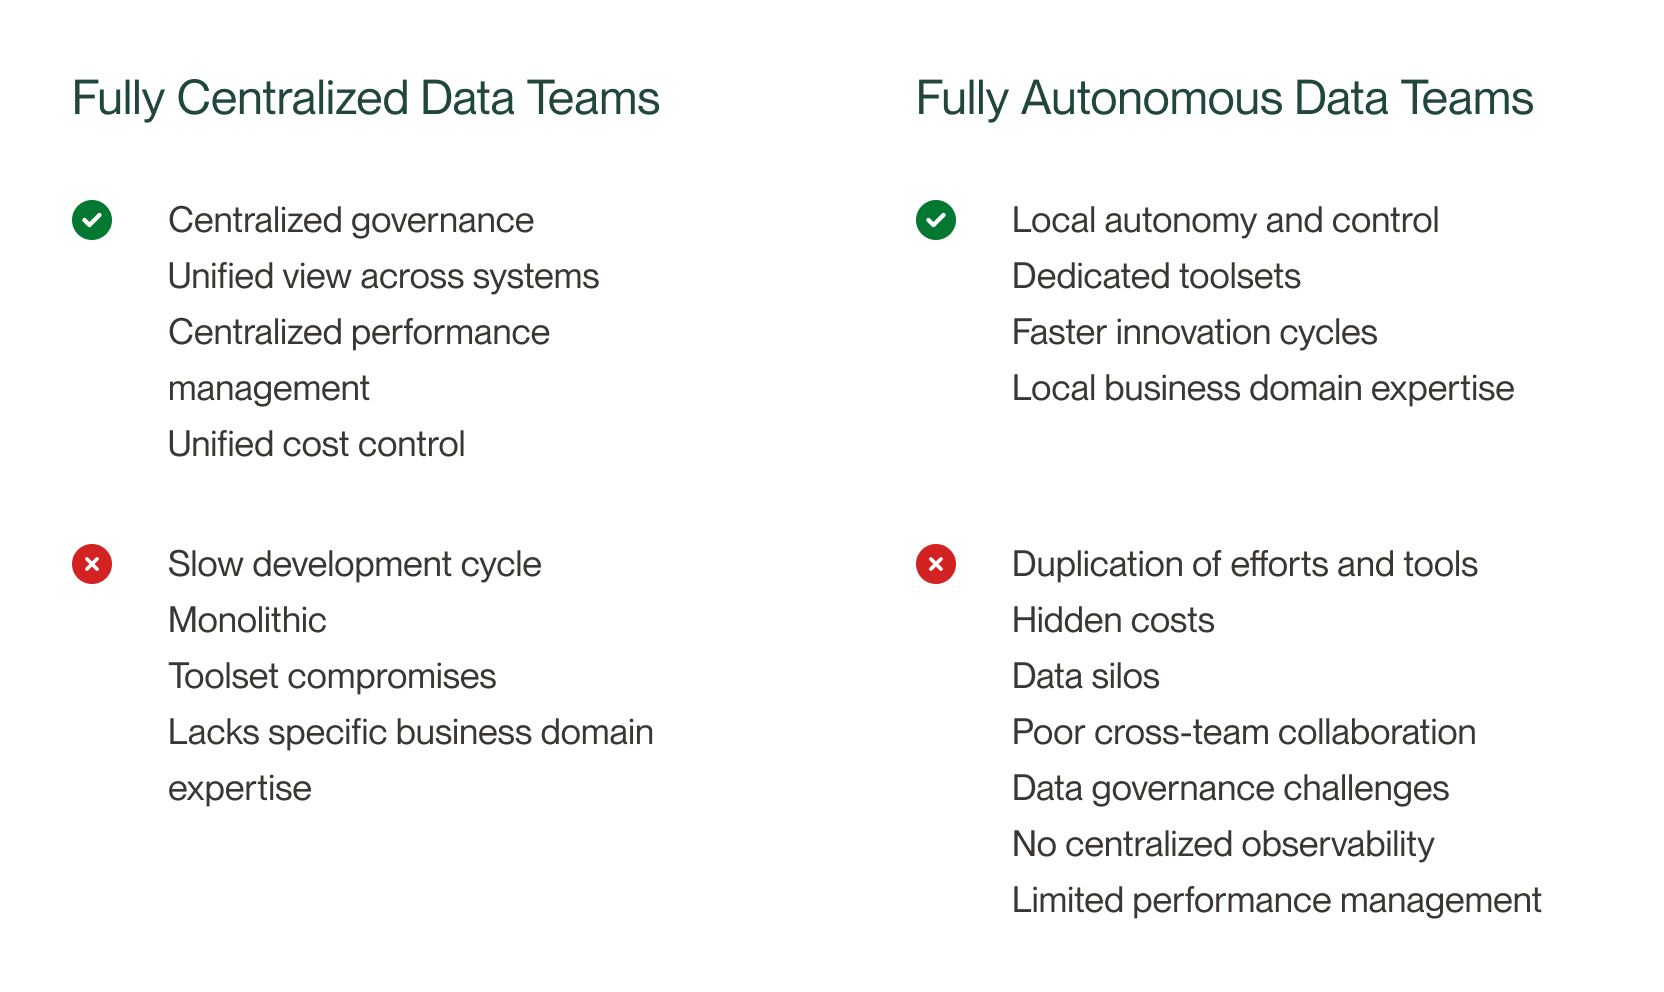 The pros and cons of fully centralized and fully autonomous teams.